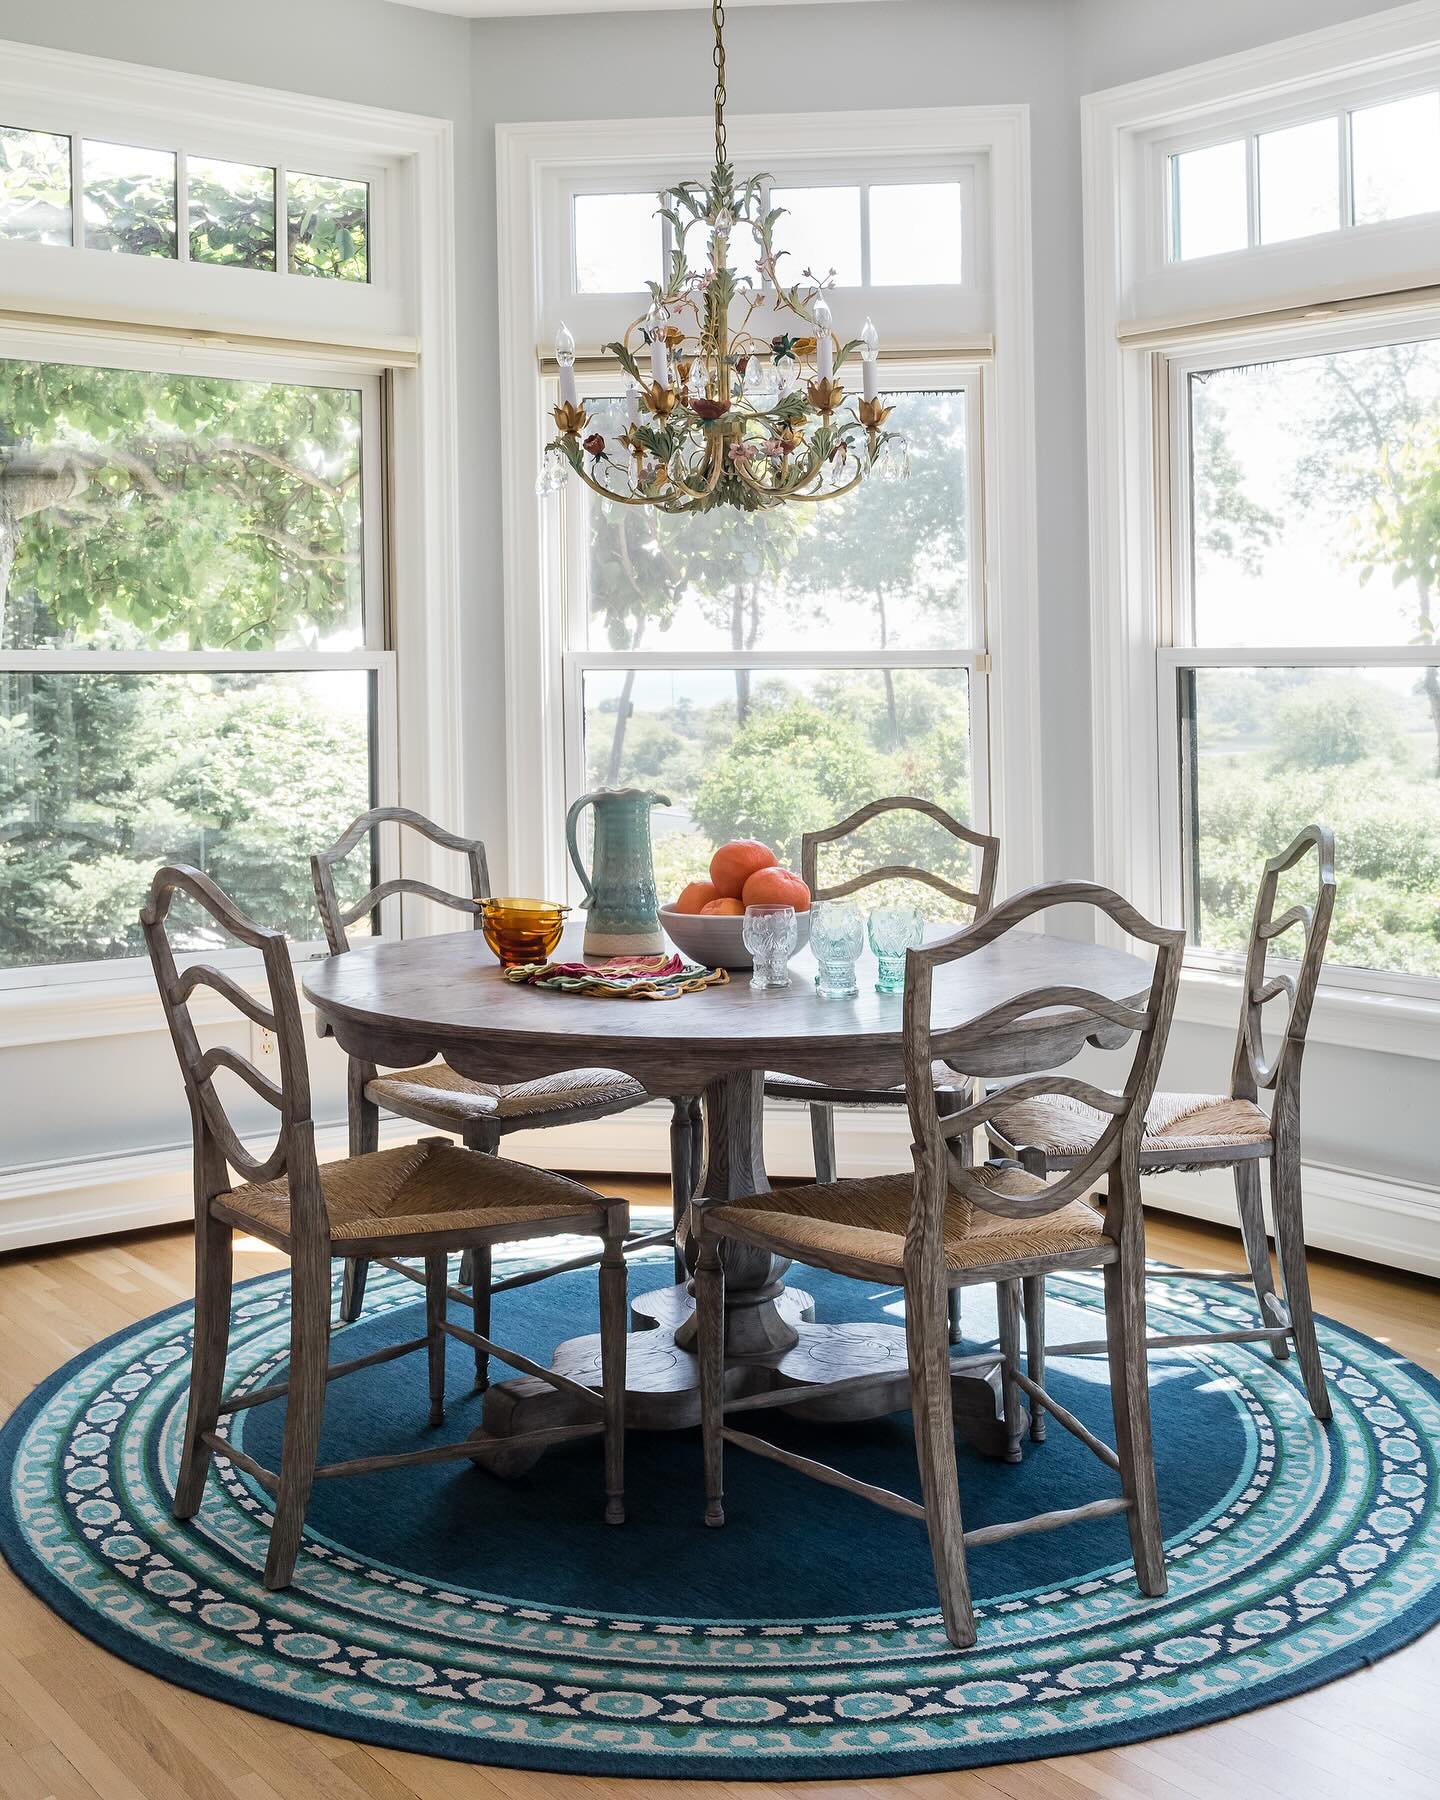 An intermix of organic shapes creates interest in this sunny ☀️ breakfast nook. A very happy room for daily meals with a view.

Photo: @joyellewest 
.
.
.
#opalineis #coastalliving #diningtable #newenglandhome #smmakelifebeautiful #bostoninteriordesi